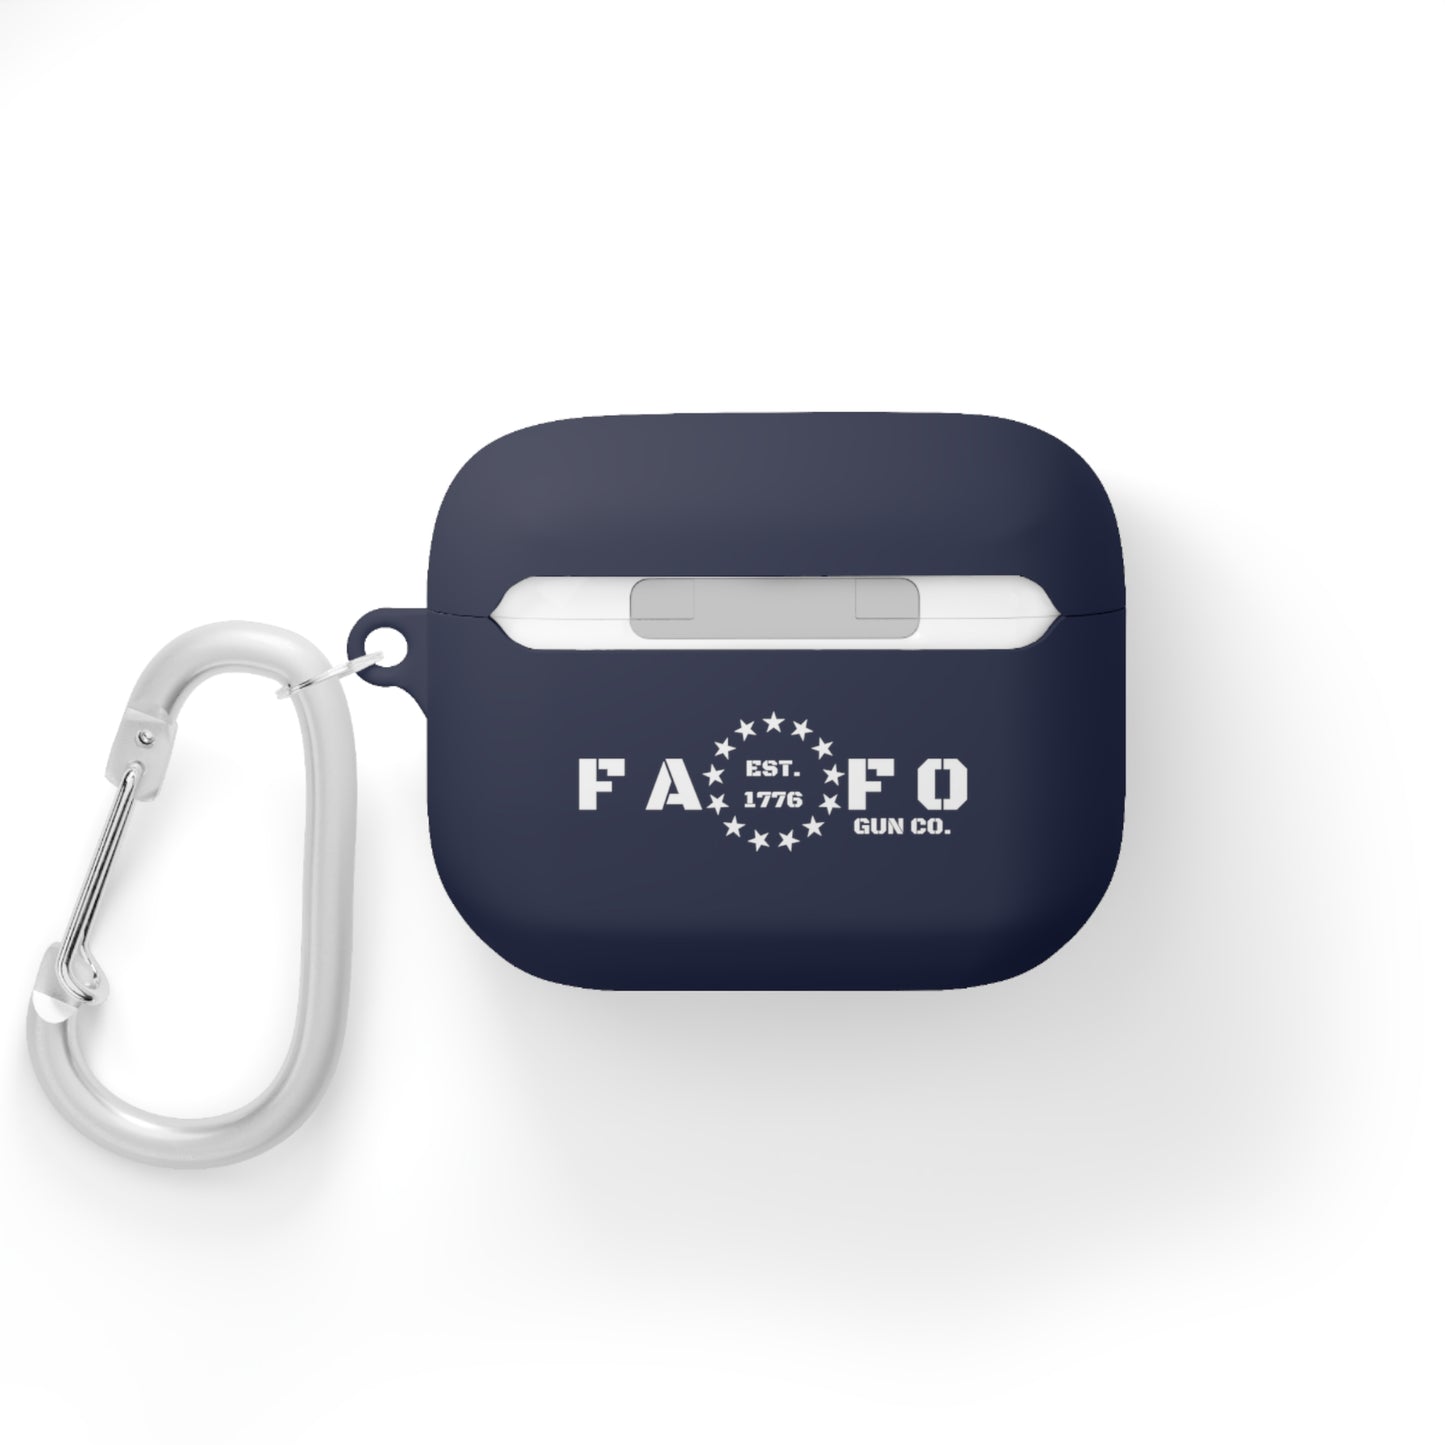 US Of FAFO Flag AirPods and AirPods Pro Case Cover